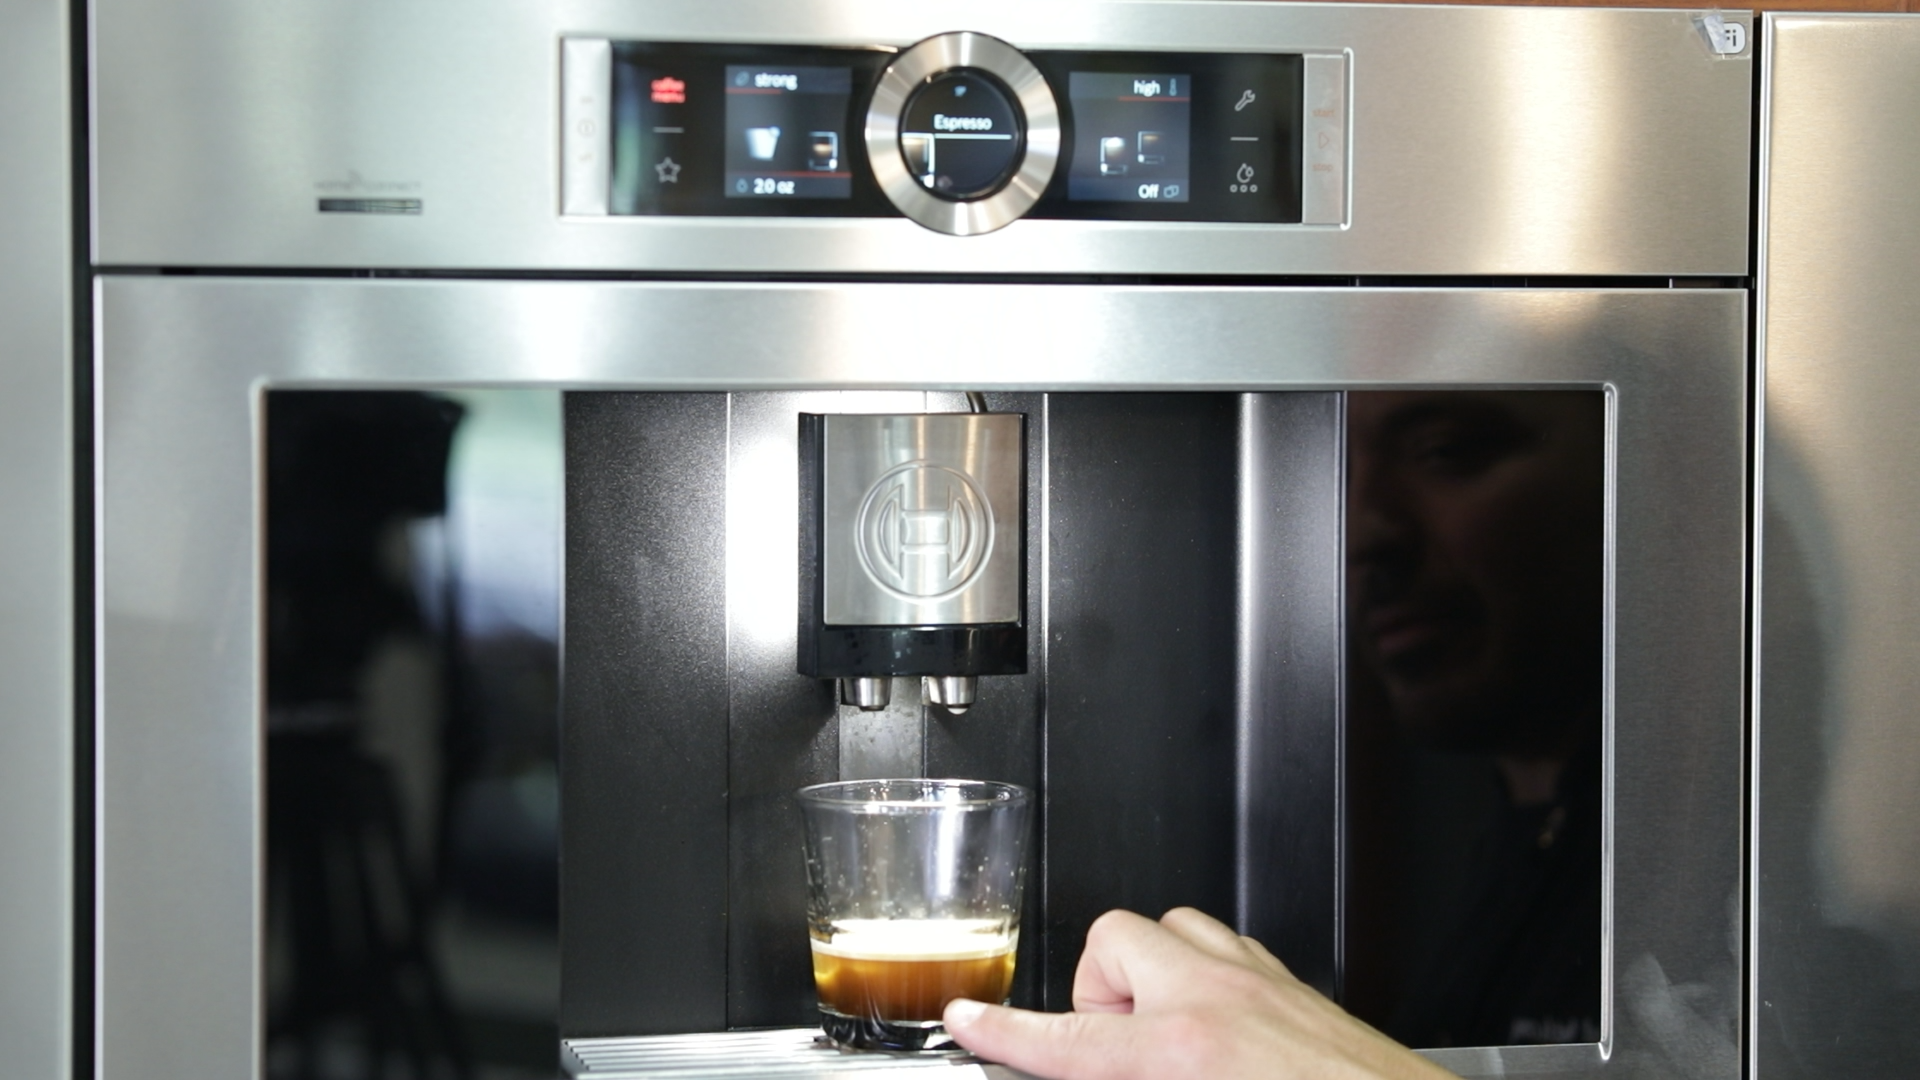 Get a fancy Wi-Fi enabled drip coffee maker for 40% off on